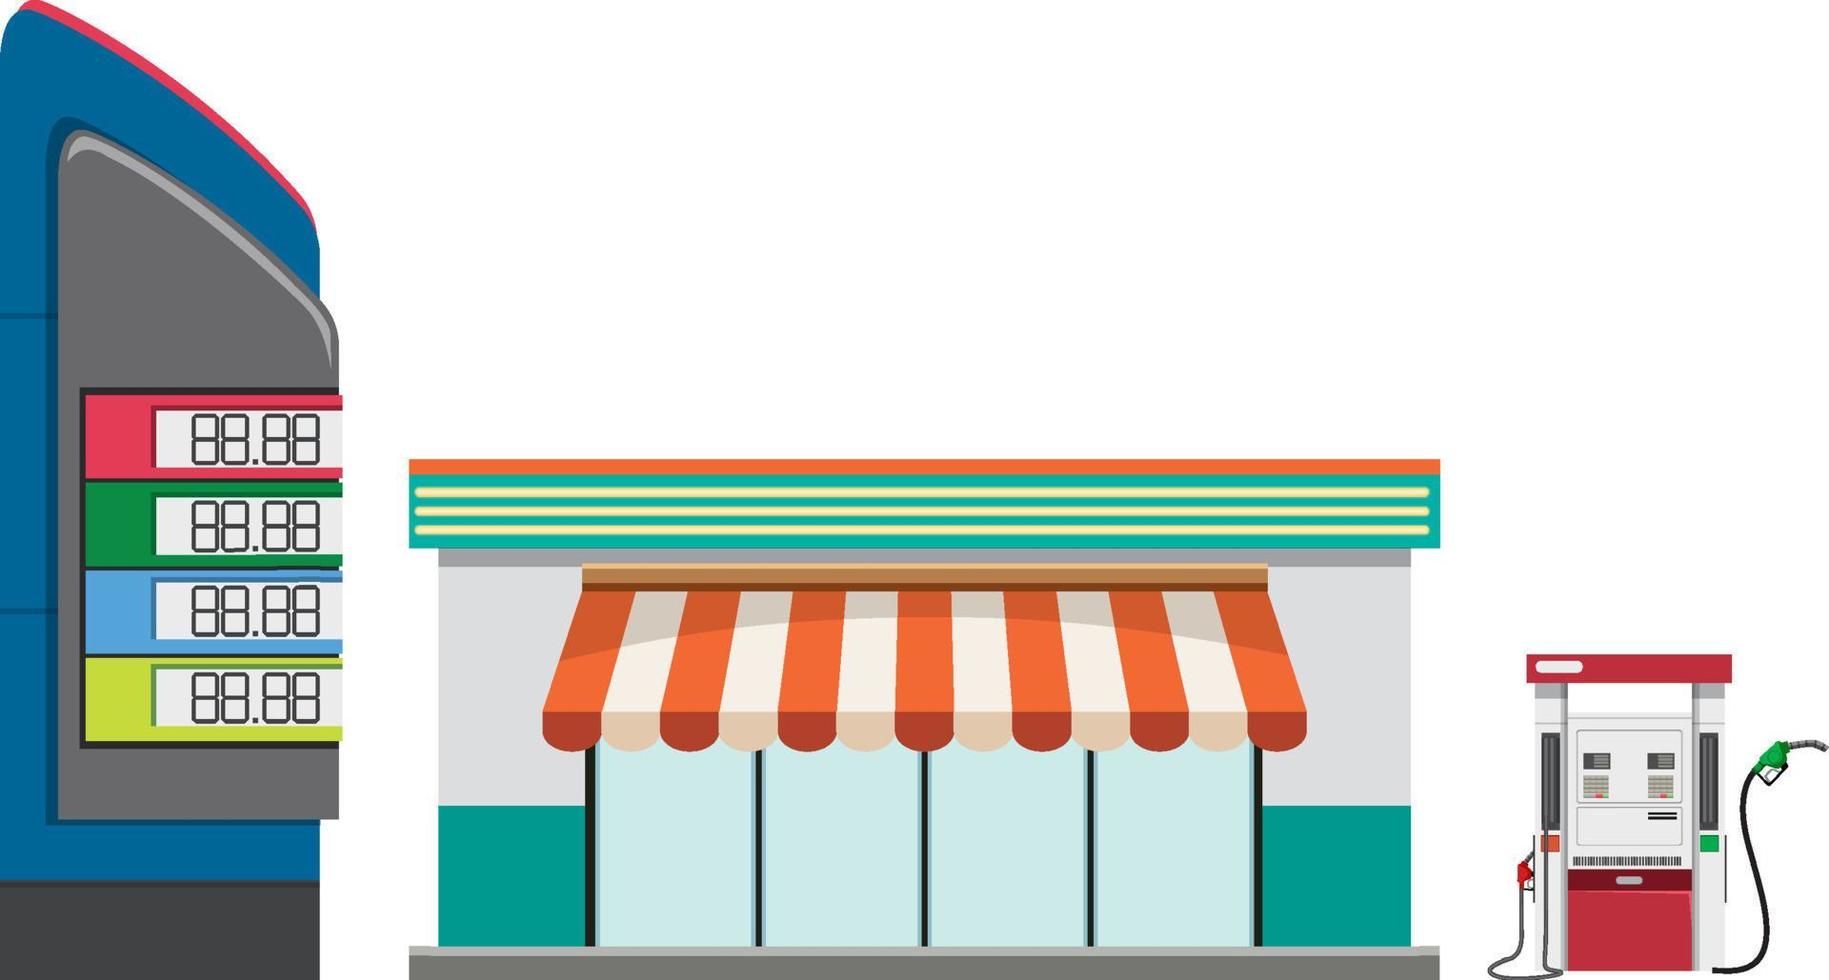 Gas station in cartoon style vector